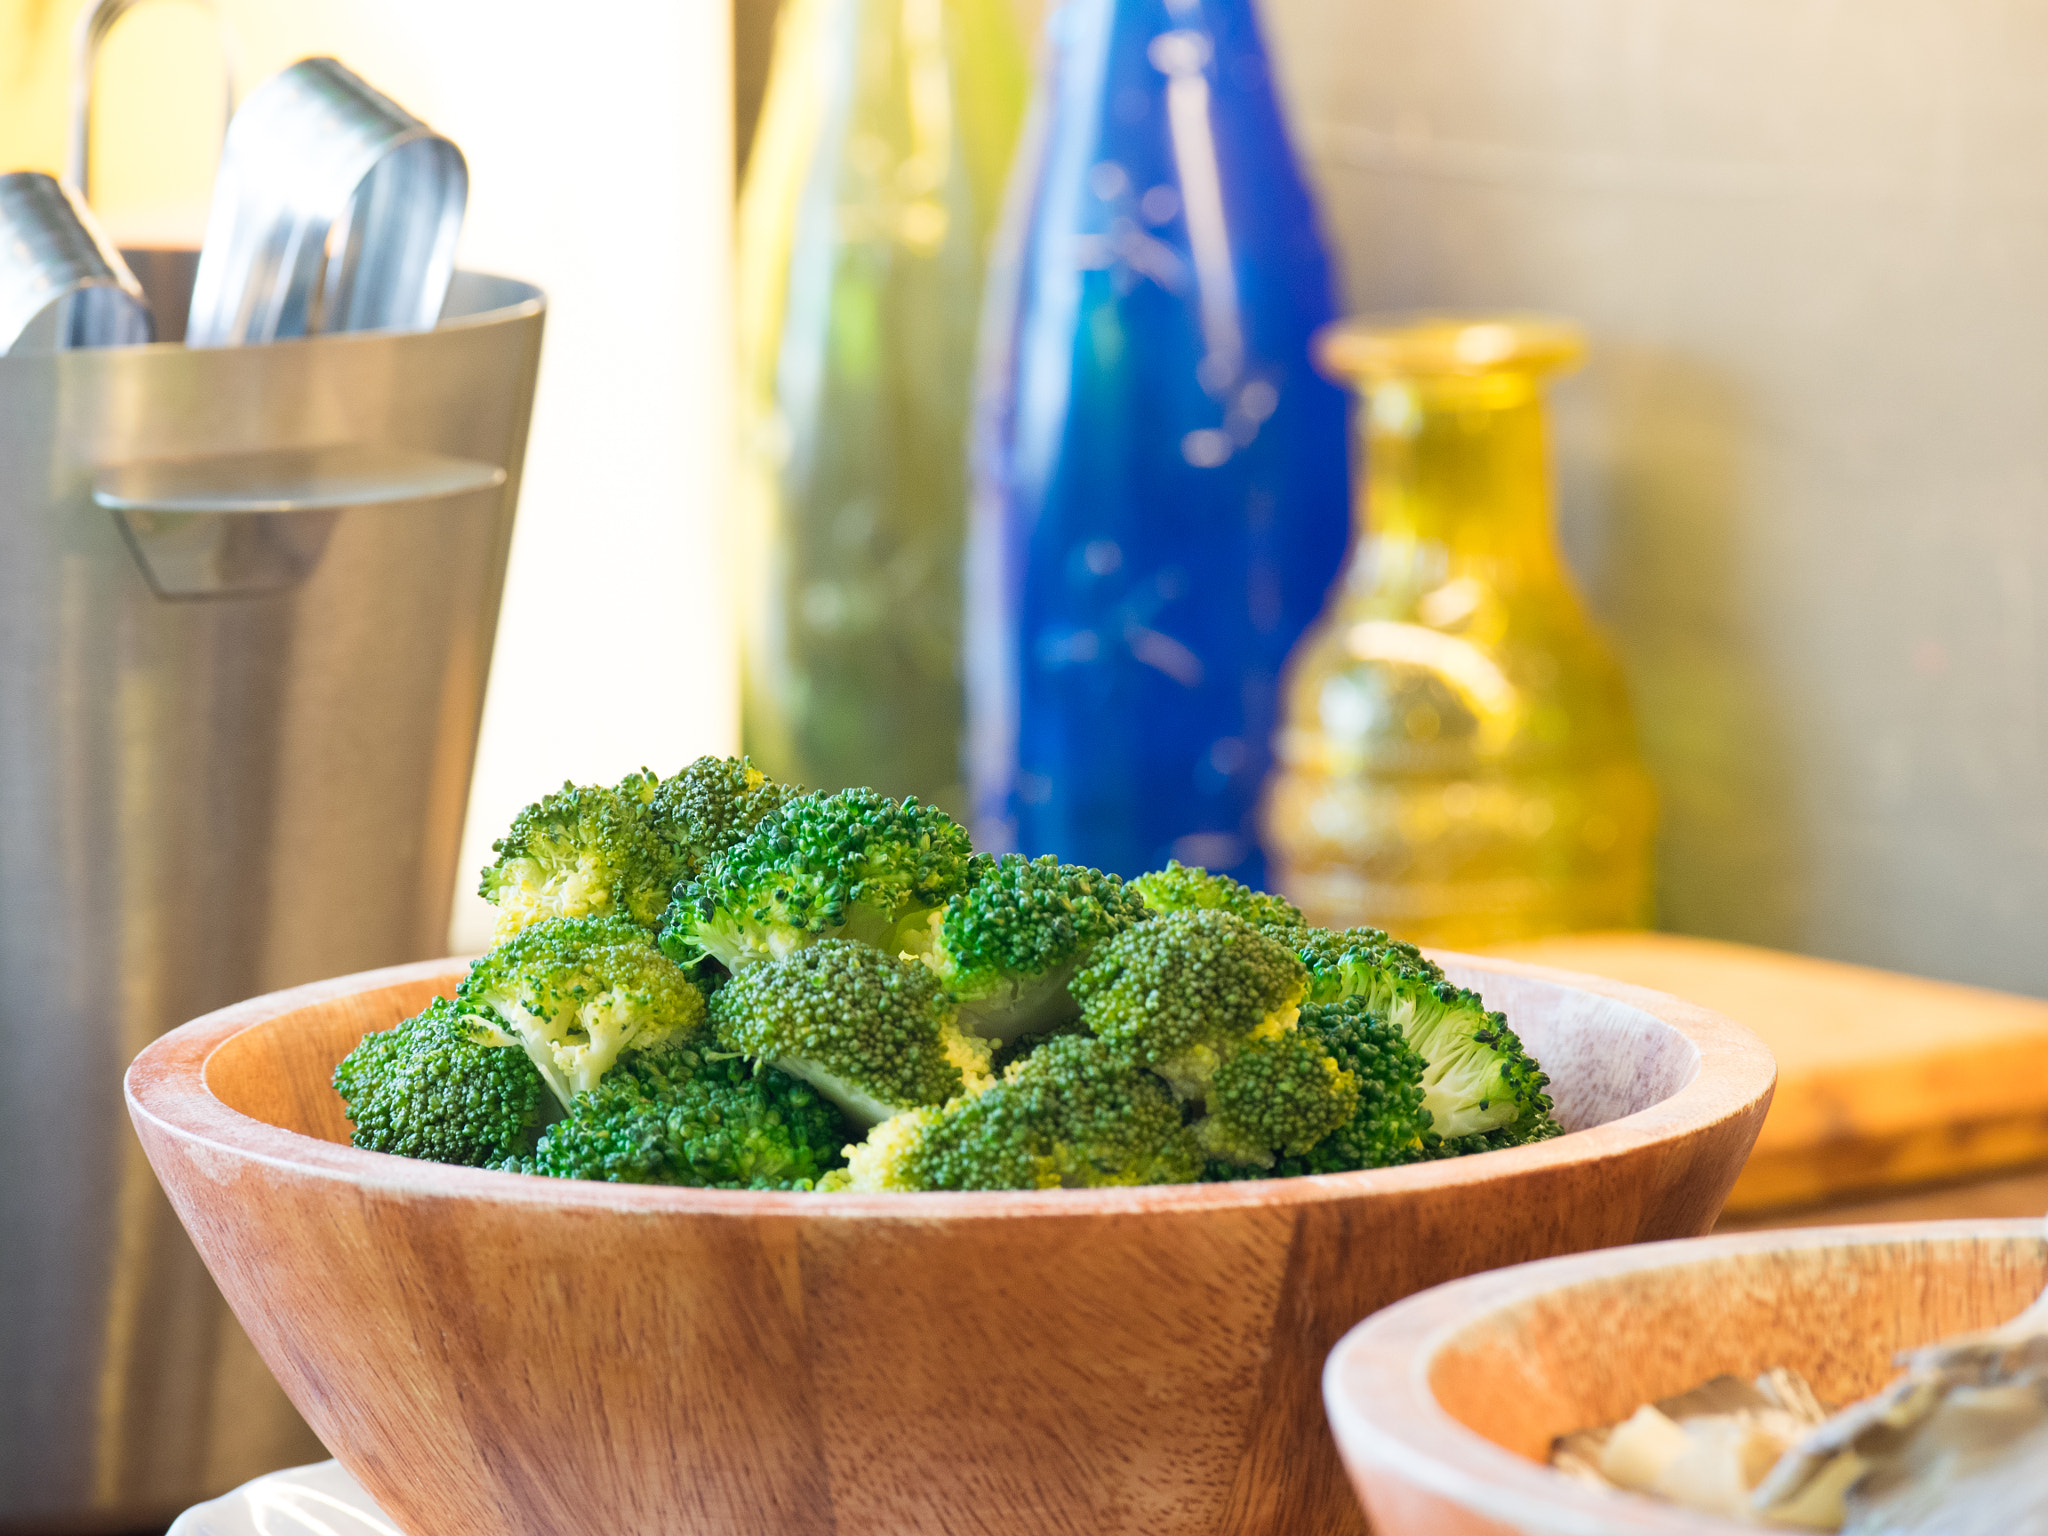 Olympus OM-D E-M1 sample photo. Fresh broccoli with spinach in bowl on wooden table close up con photography